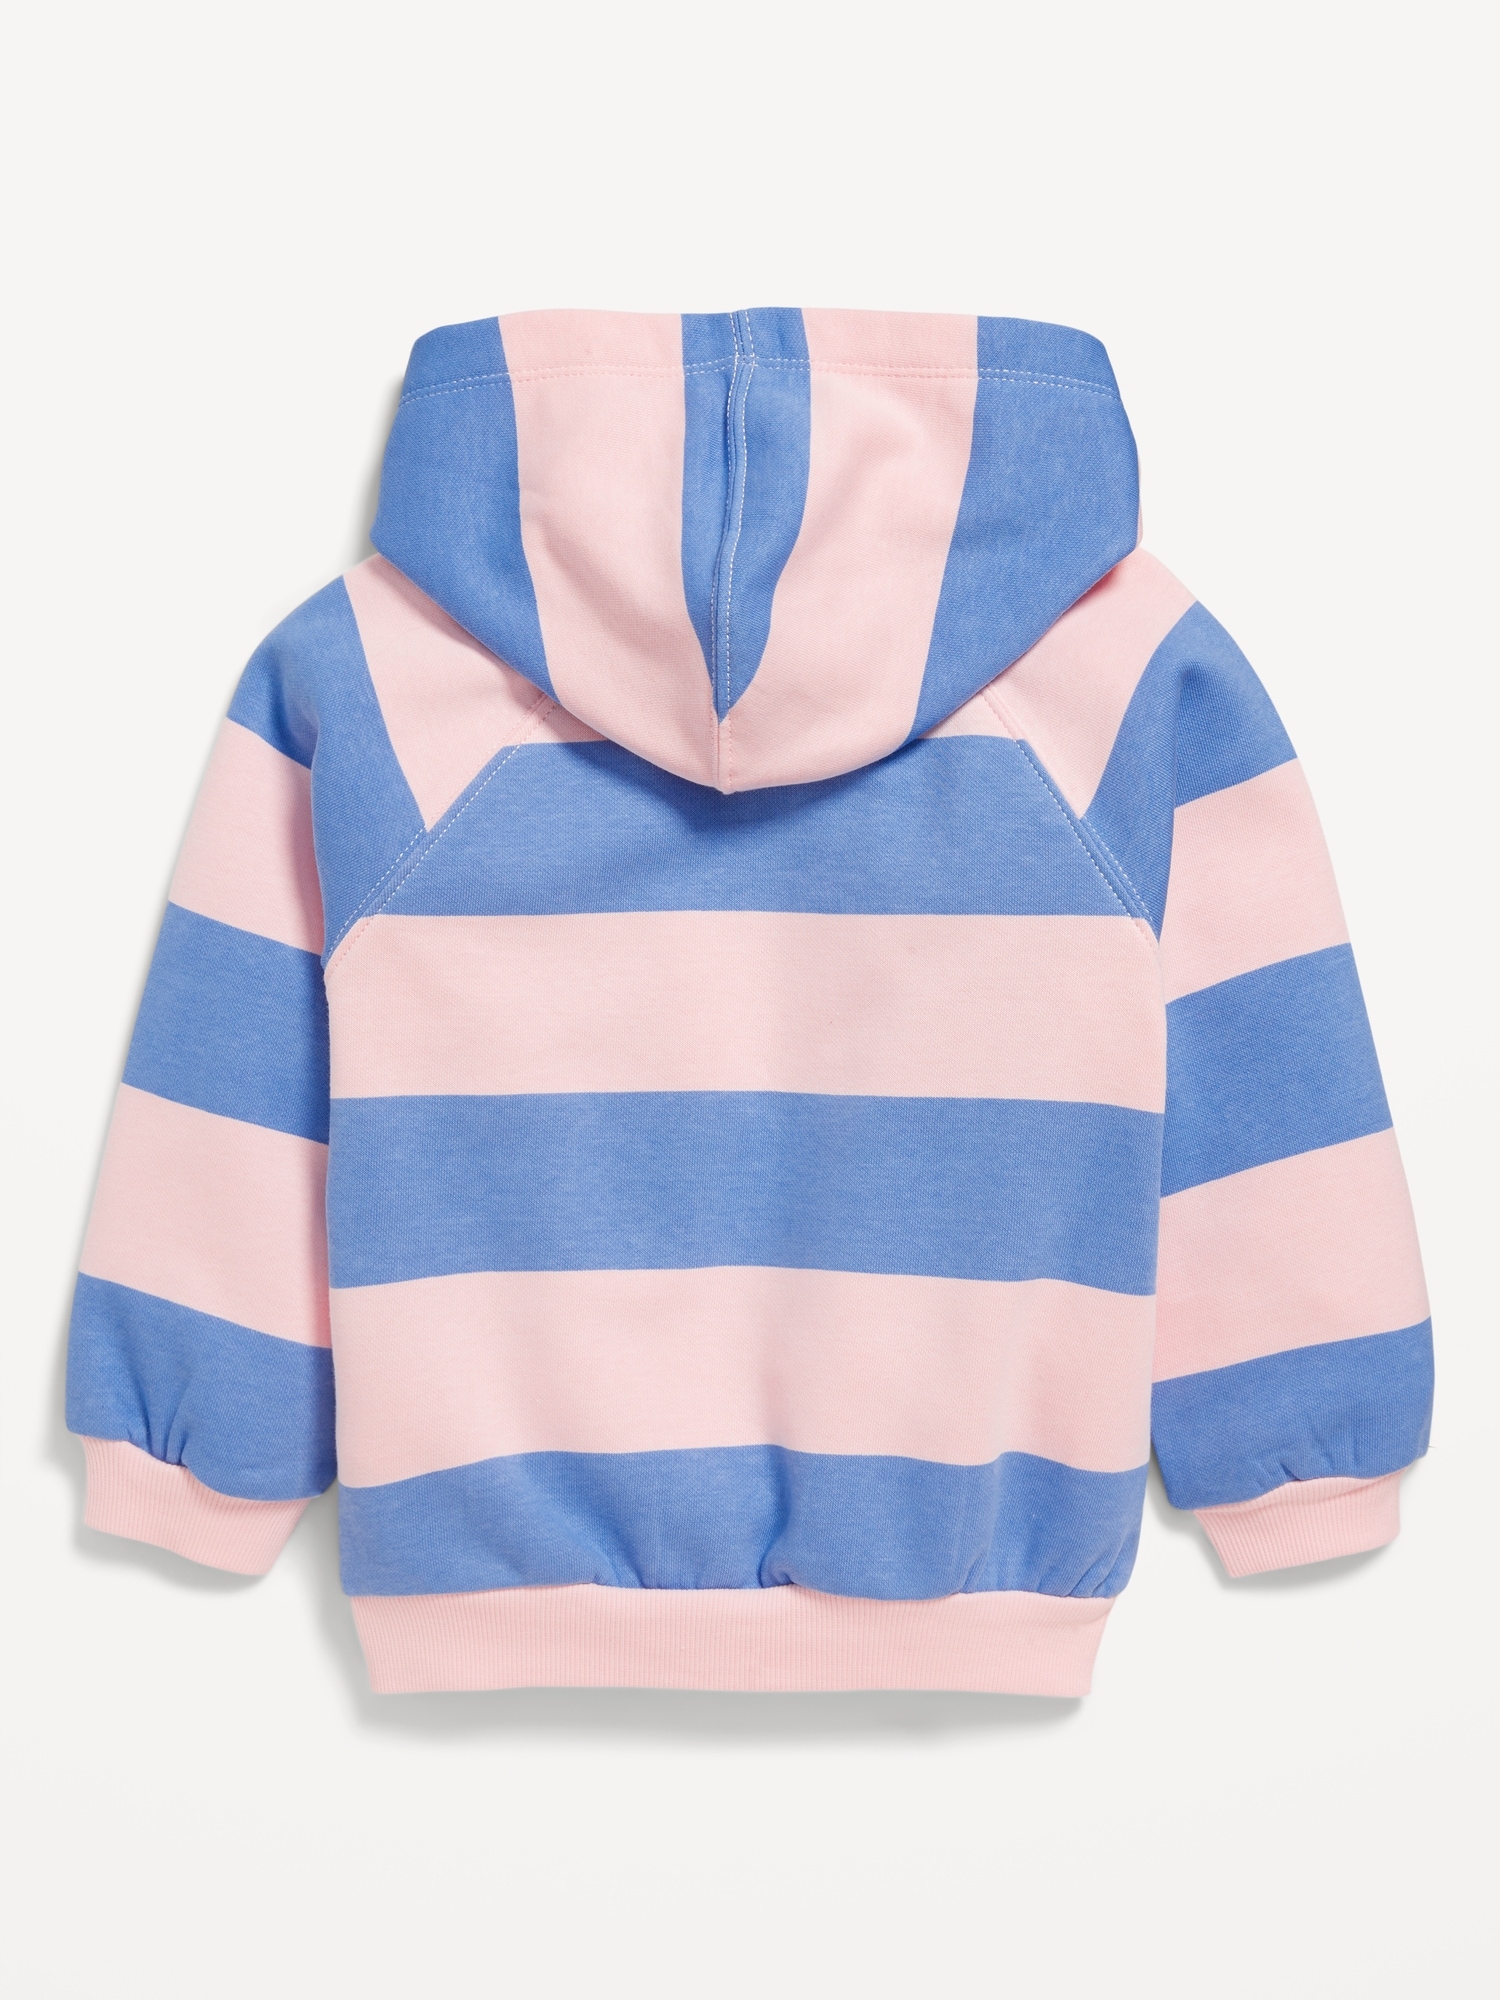 Graphic Hoodie for Toddler Girls